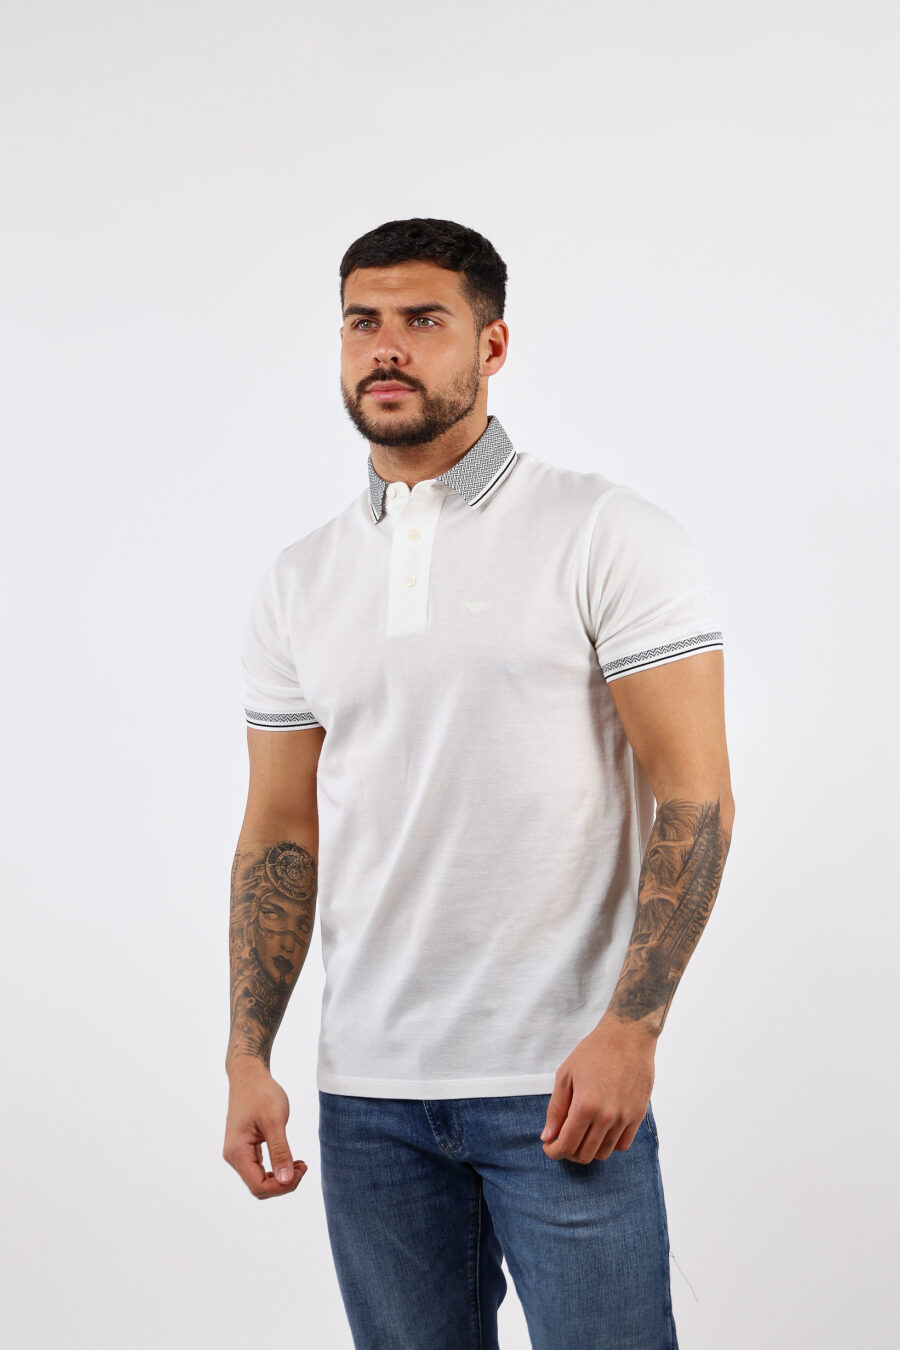 White polo shirt with classic grey collar - BLS Fashion 41